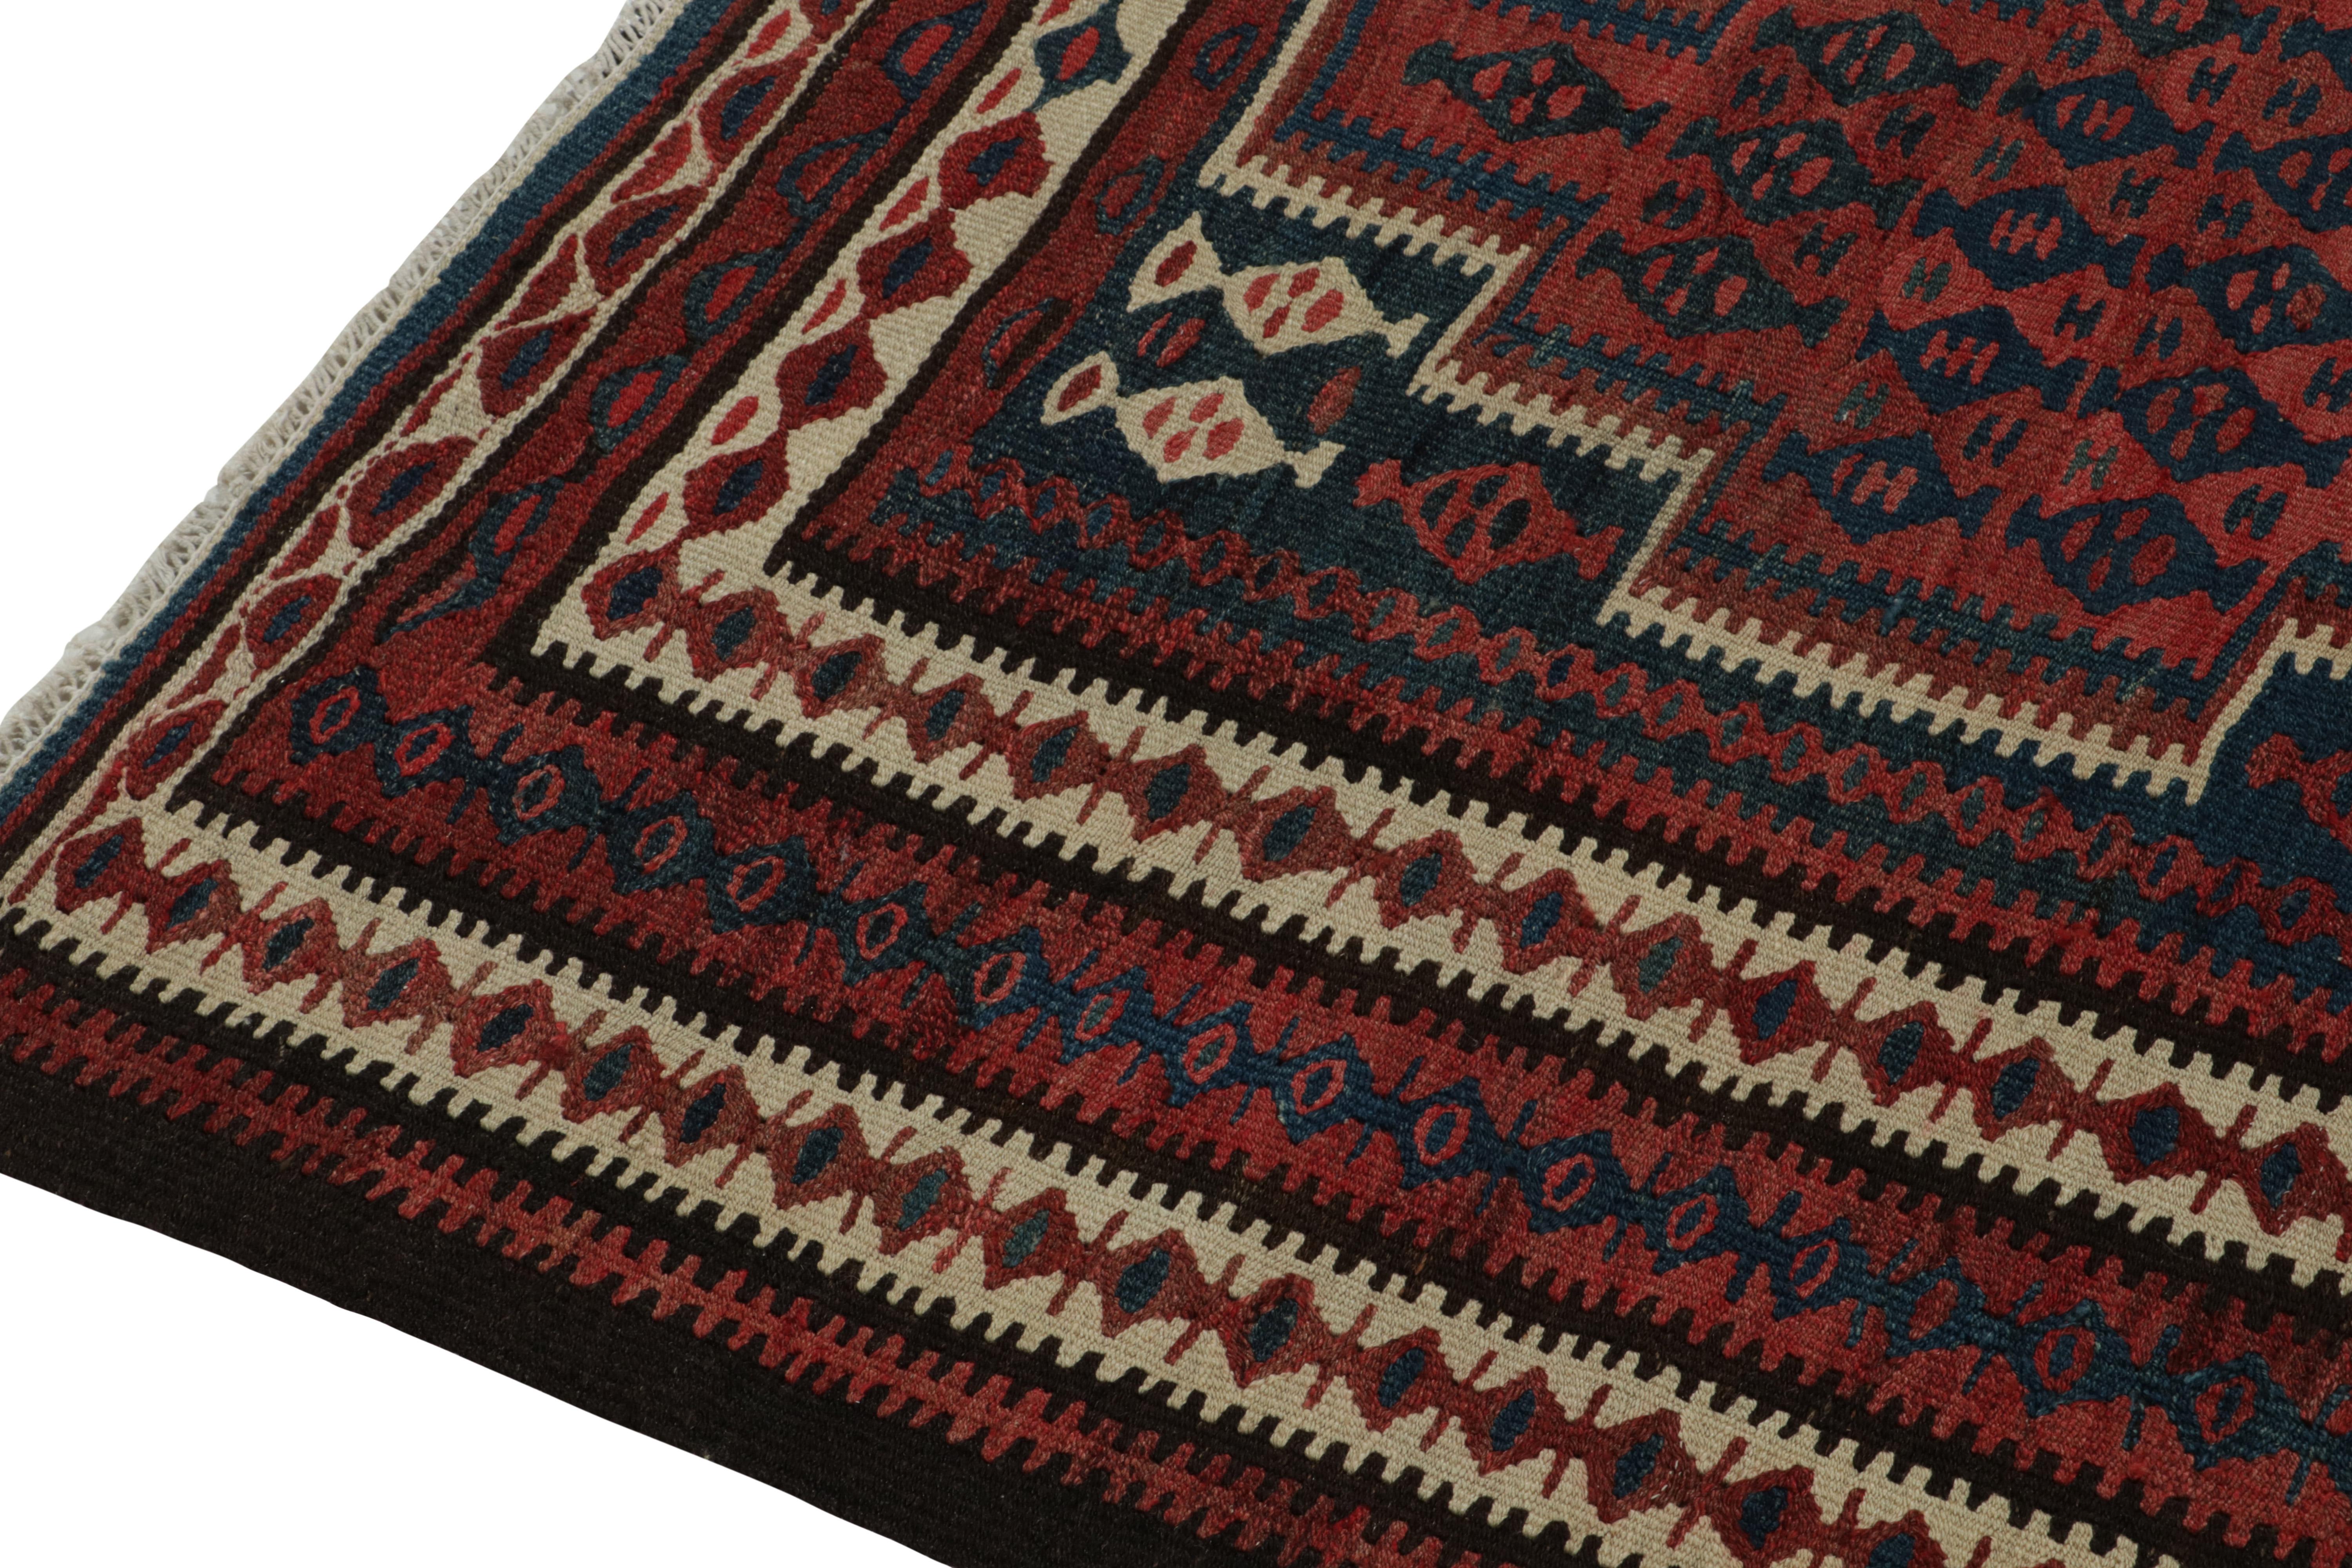 Persian 1950s Vintage Kilim Rug in Red, Blue and Brown Geometric Patterns by Rug & Kilim For Sale